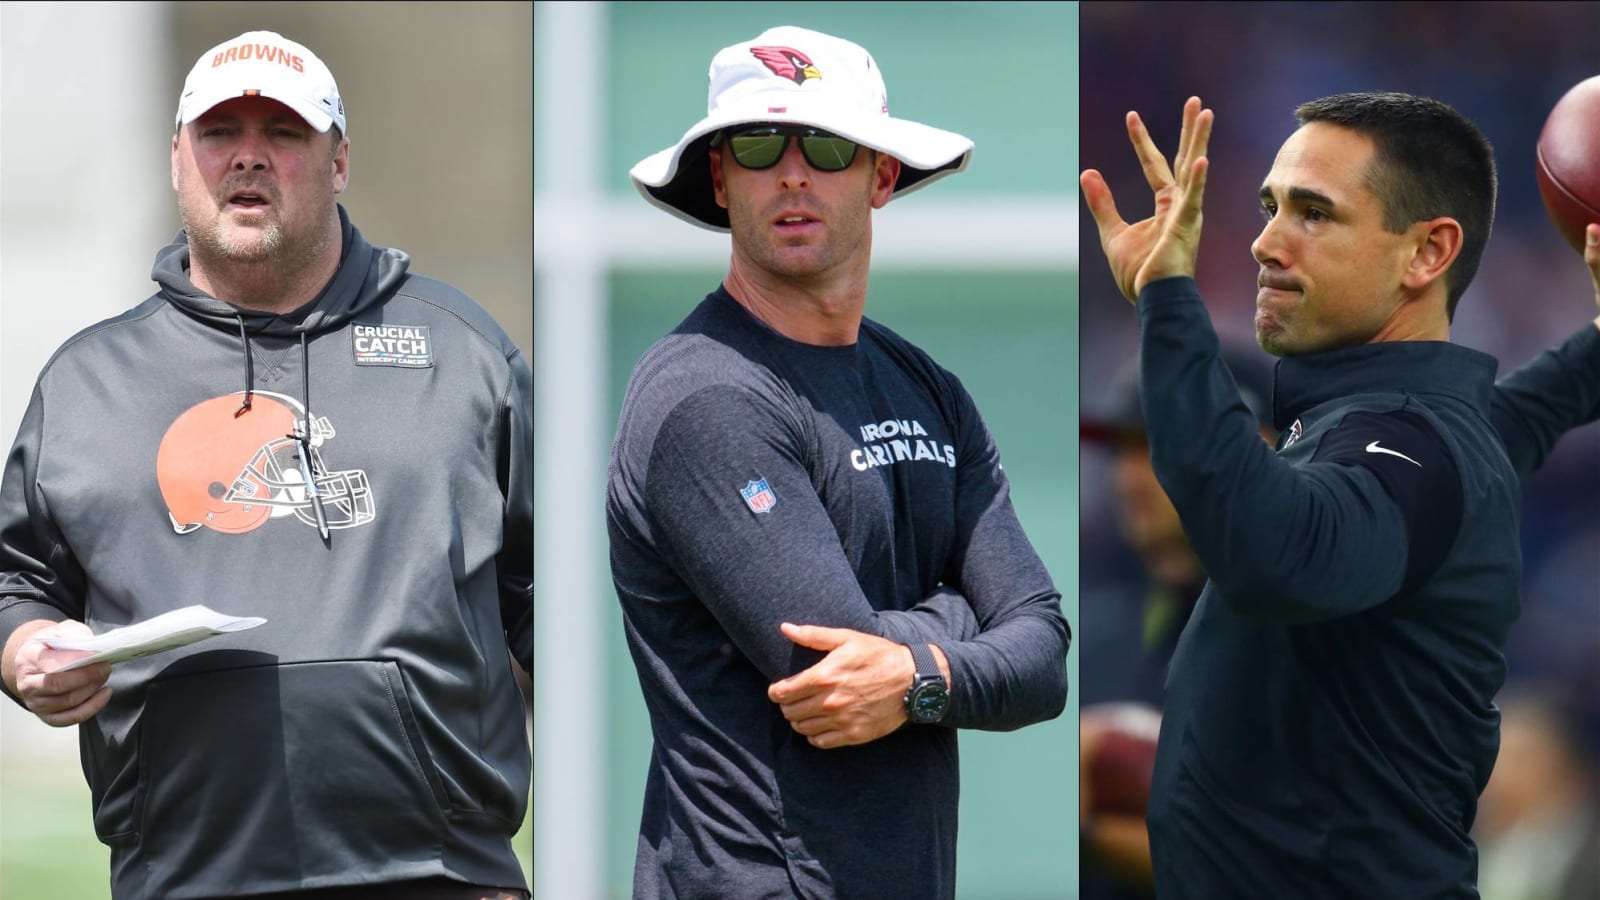 One-On-One: Pressure ratcheted up most for these NFL rookie head coaches